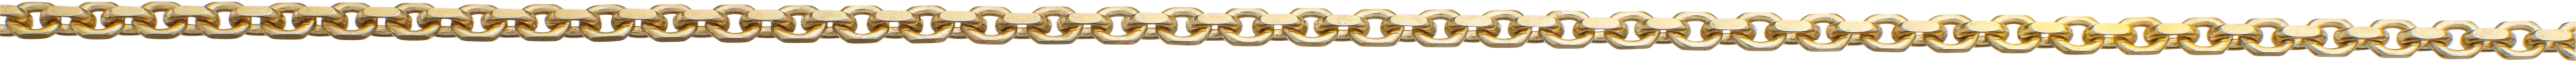 Anchor chain diamond plated gold 585/- 1.60mm, wire thickness 0.50mm